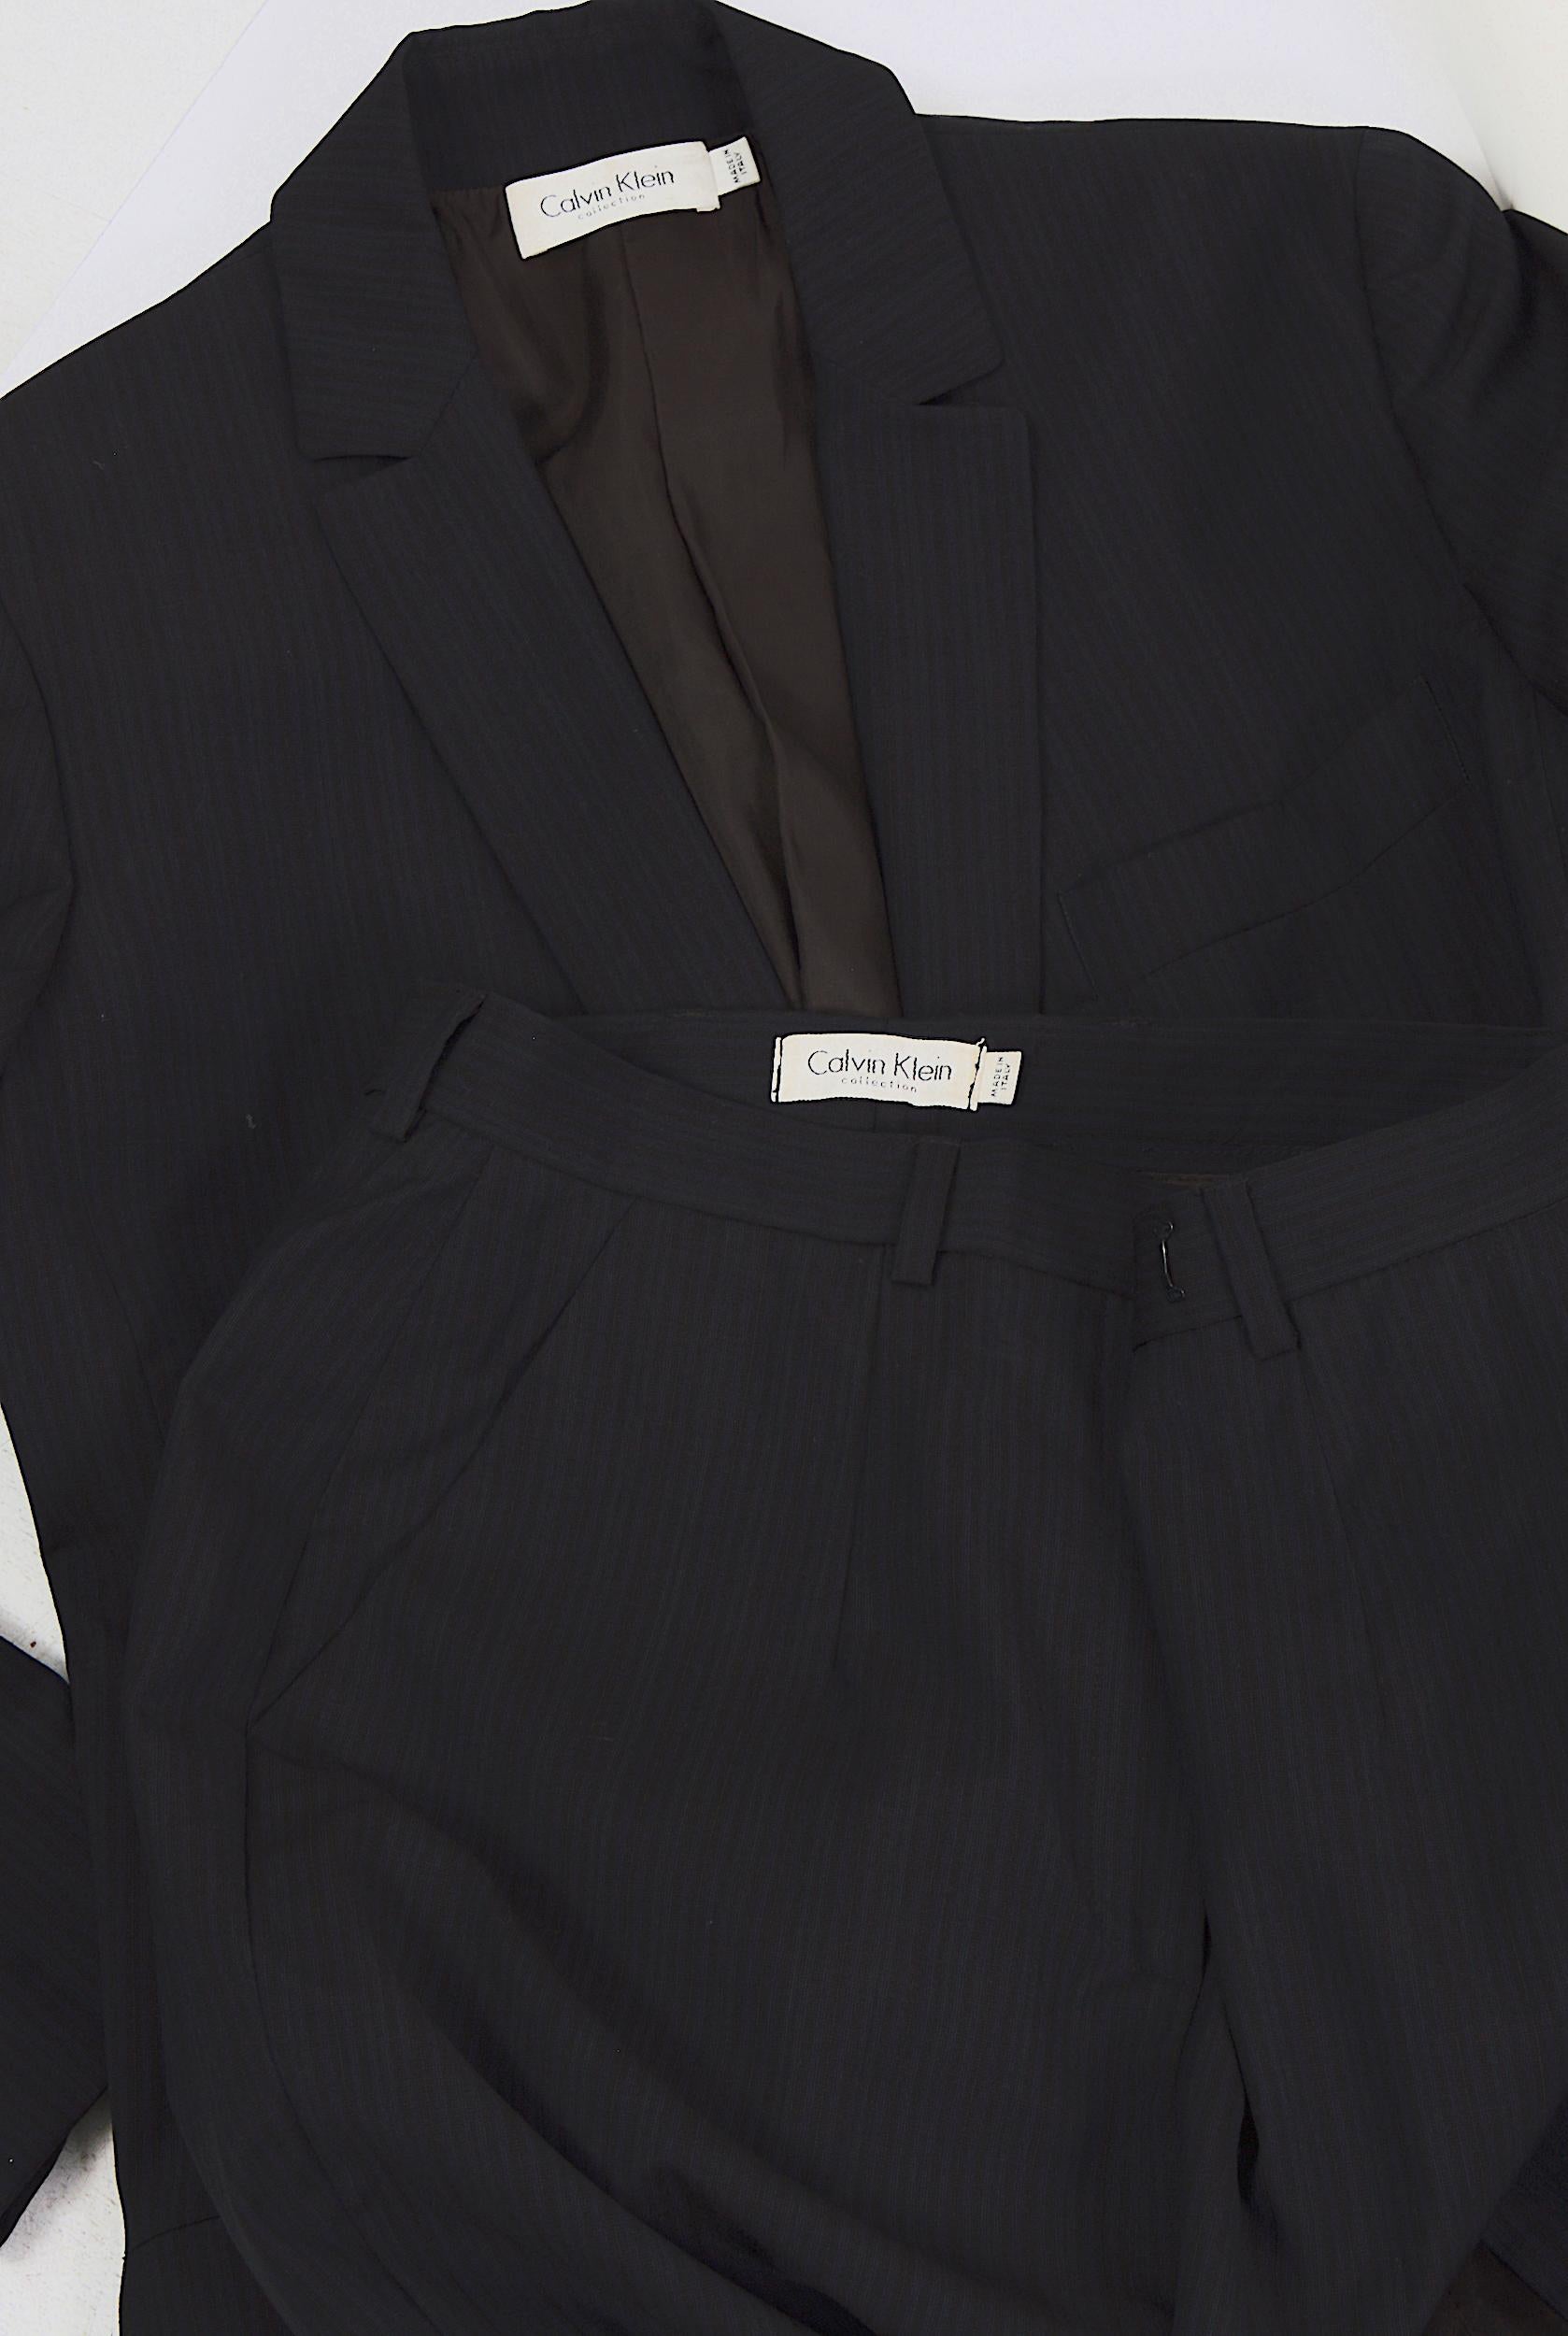 Calvin Klein collection by Calvin Klein vintage 1990's tailored pin stripe suit For Sale 10